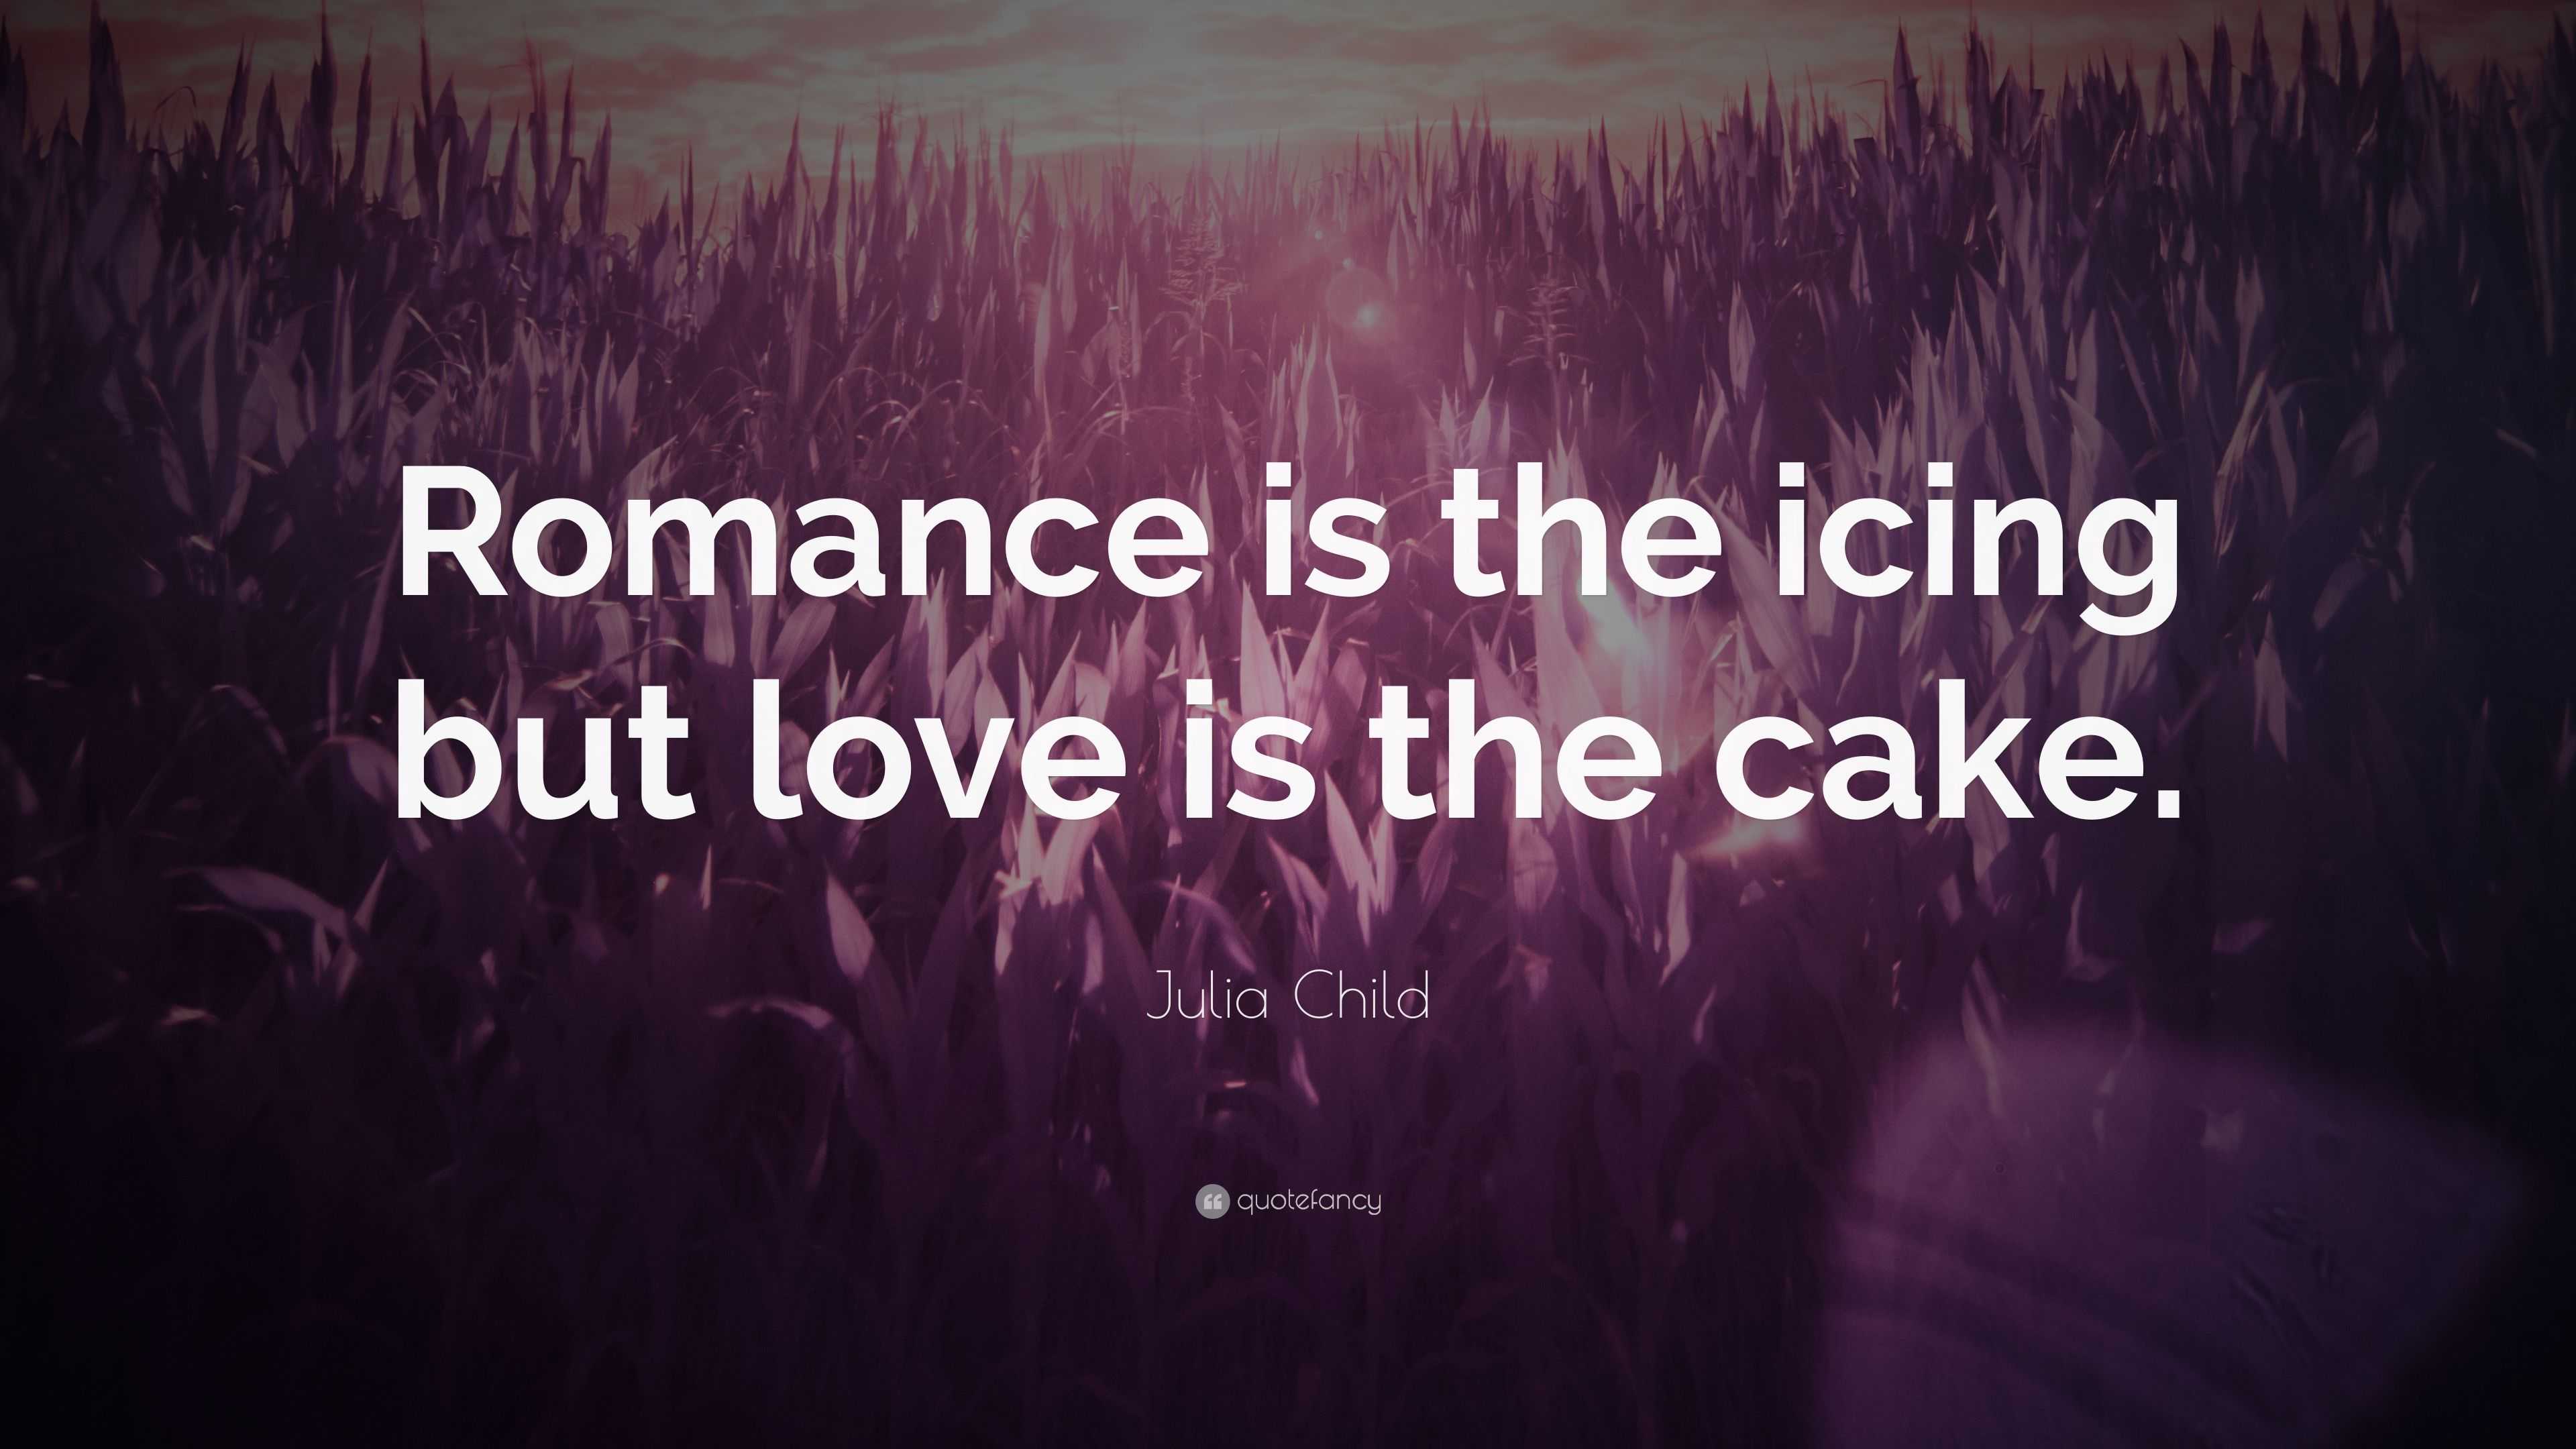 Julia Child Quote: “Romance is the icing but love is the cake.”